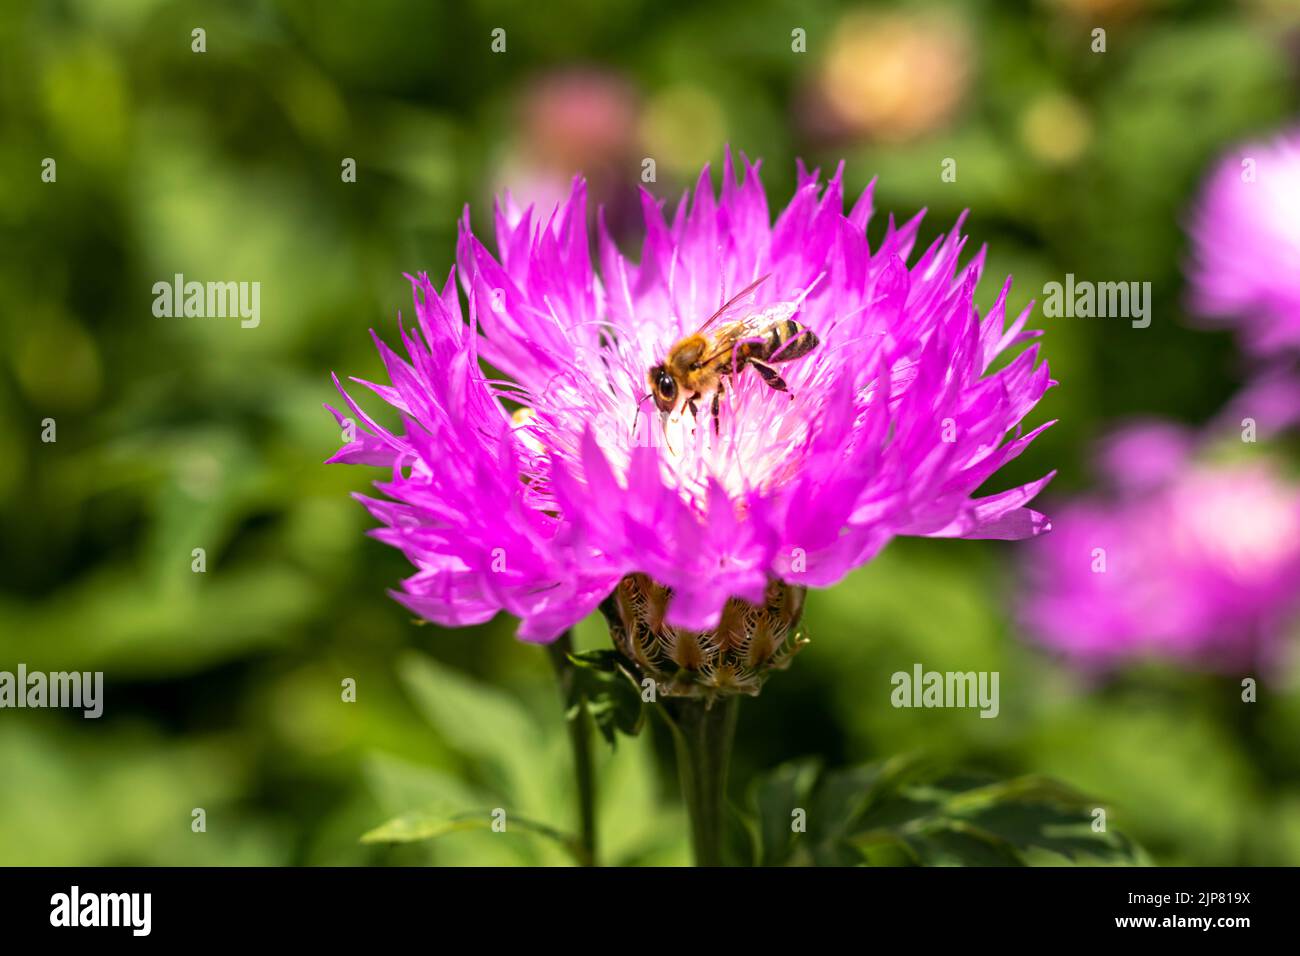 Purple with white cornflower flower with a bee close-up. Selective focus. Place for text. Stock Photo